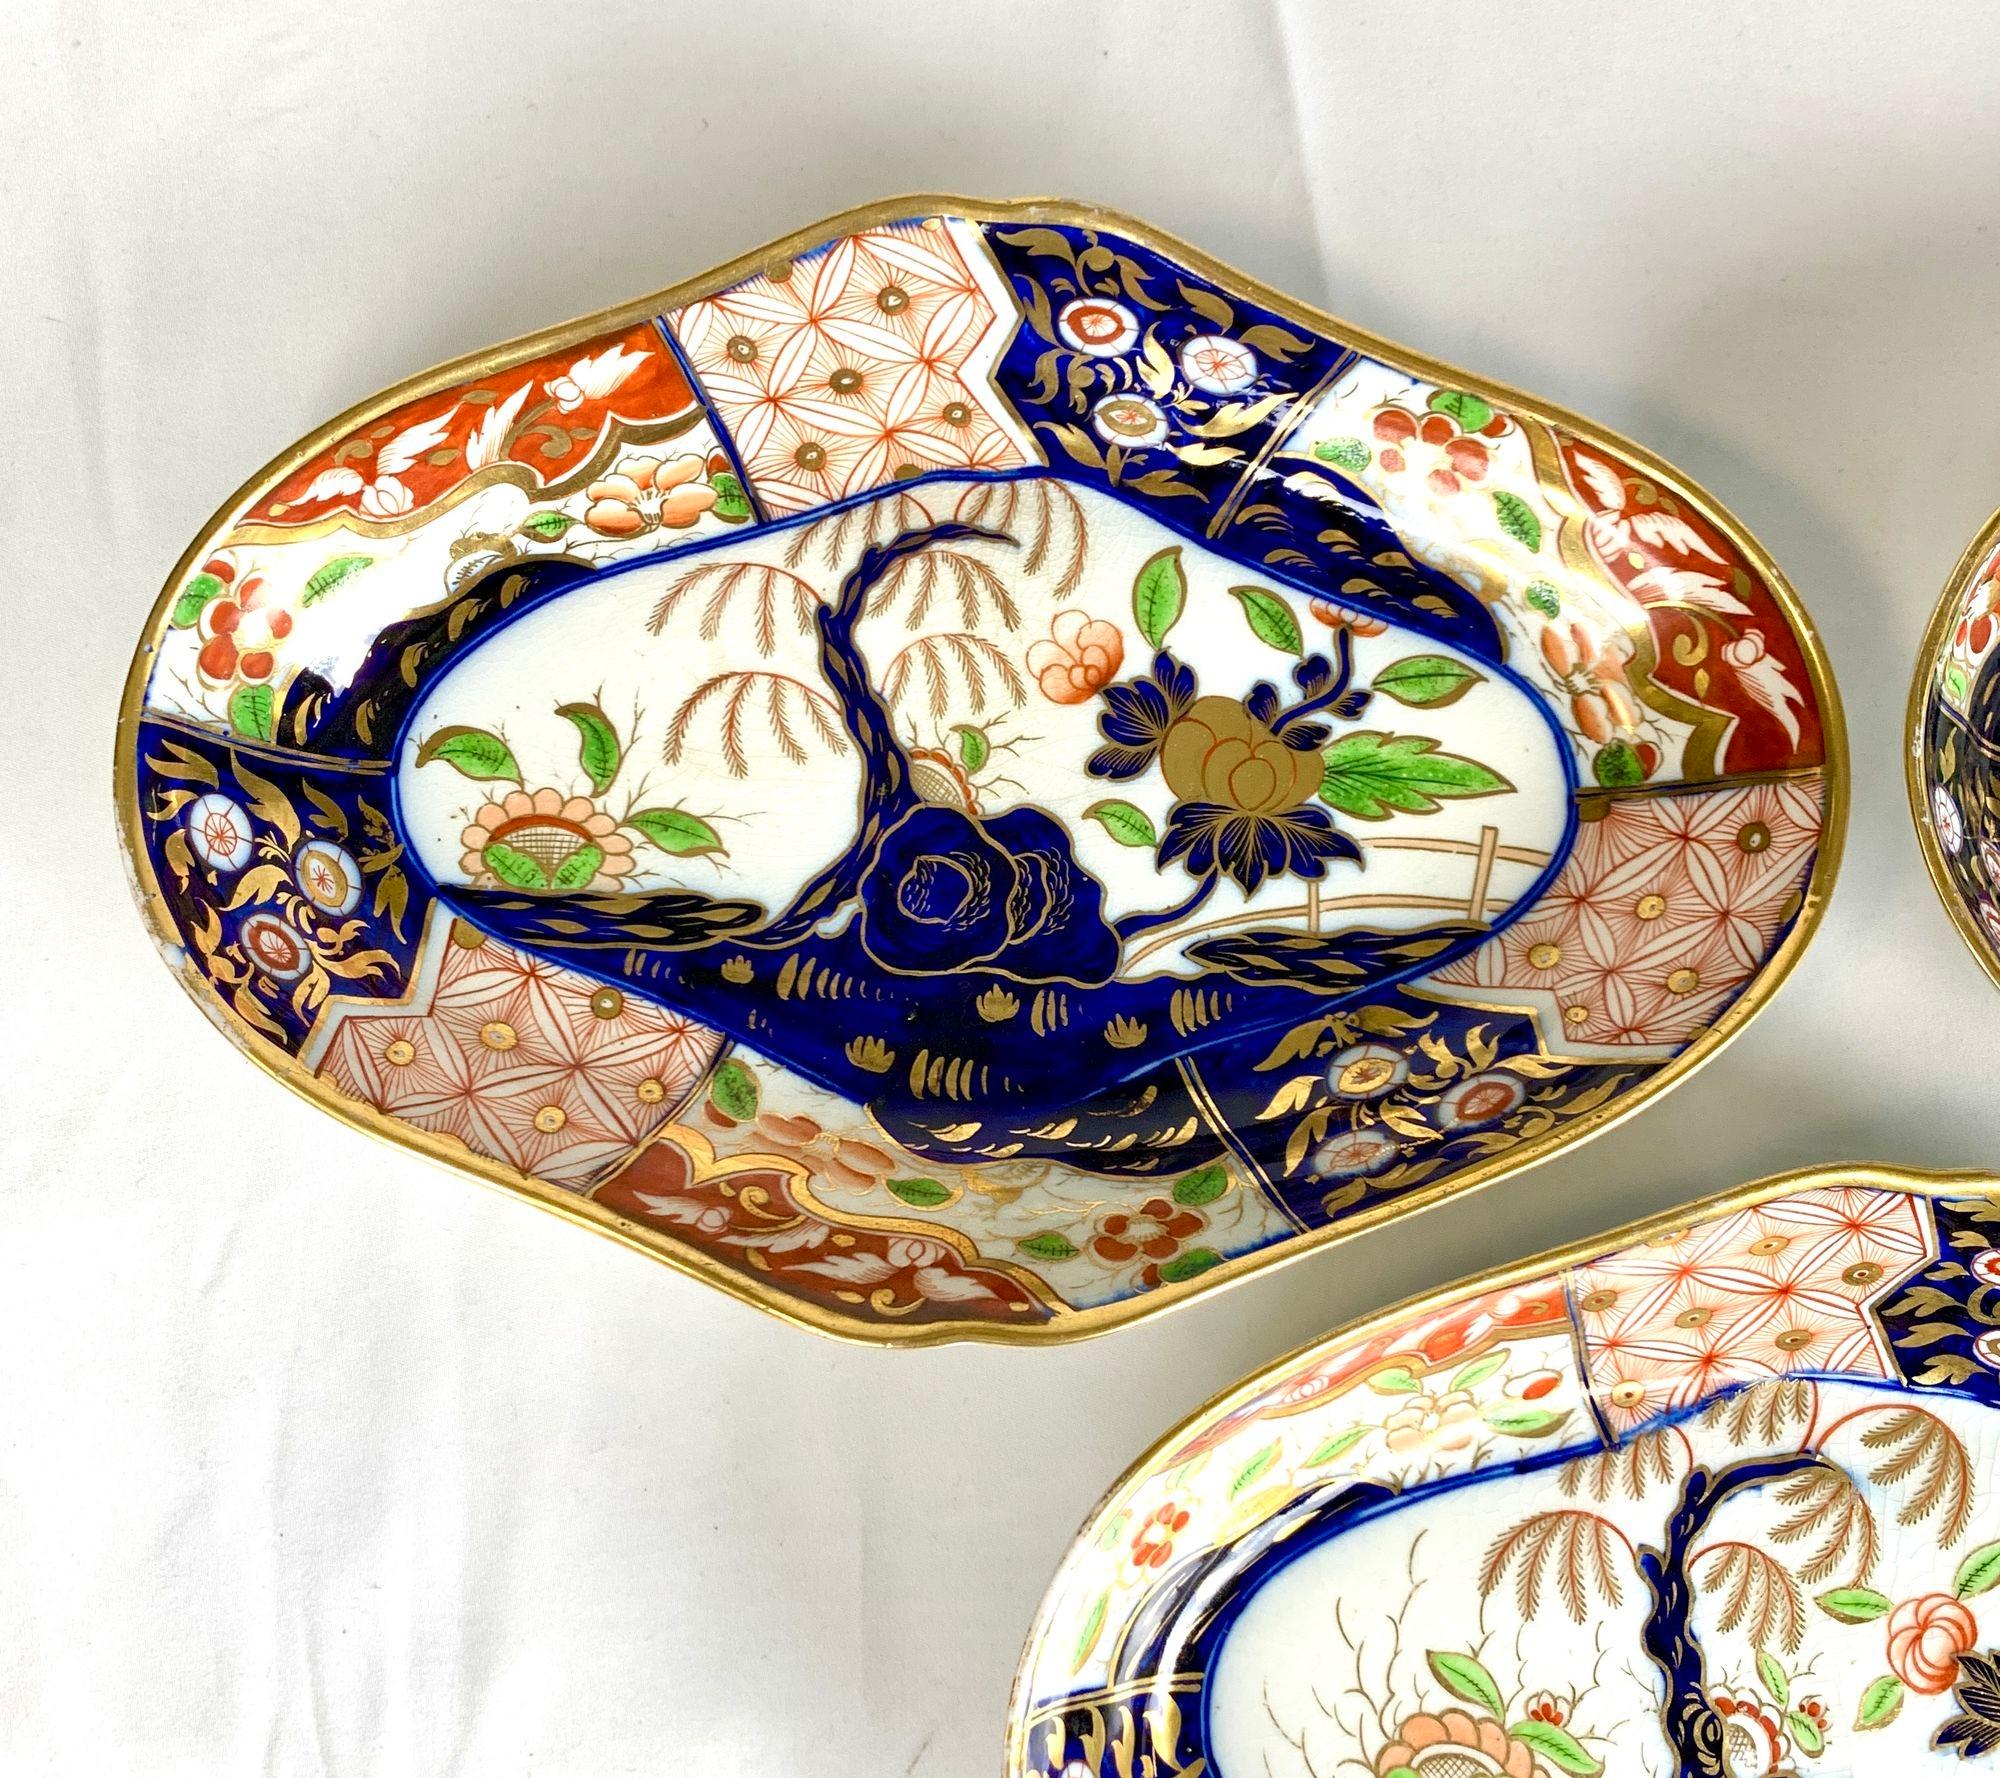 This set of three Coalport Money Tree pattern serving dishes was hand painted in England circa 1820.
This fabulous pattern is also known as the Rock and Tree pattern.
It is one of the very best of the Regency period porcelain patterns.
The color